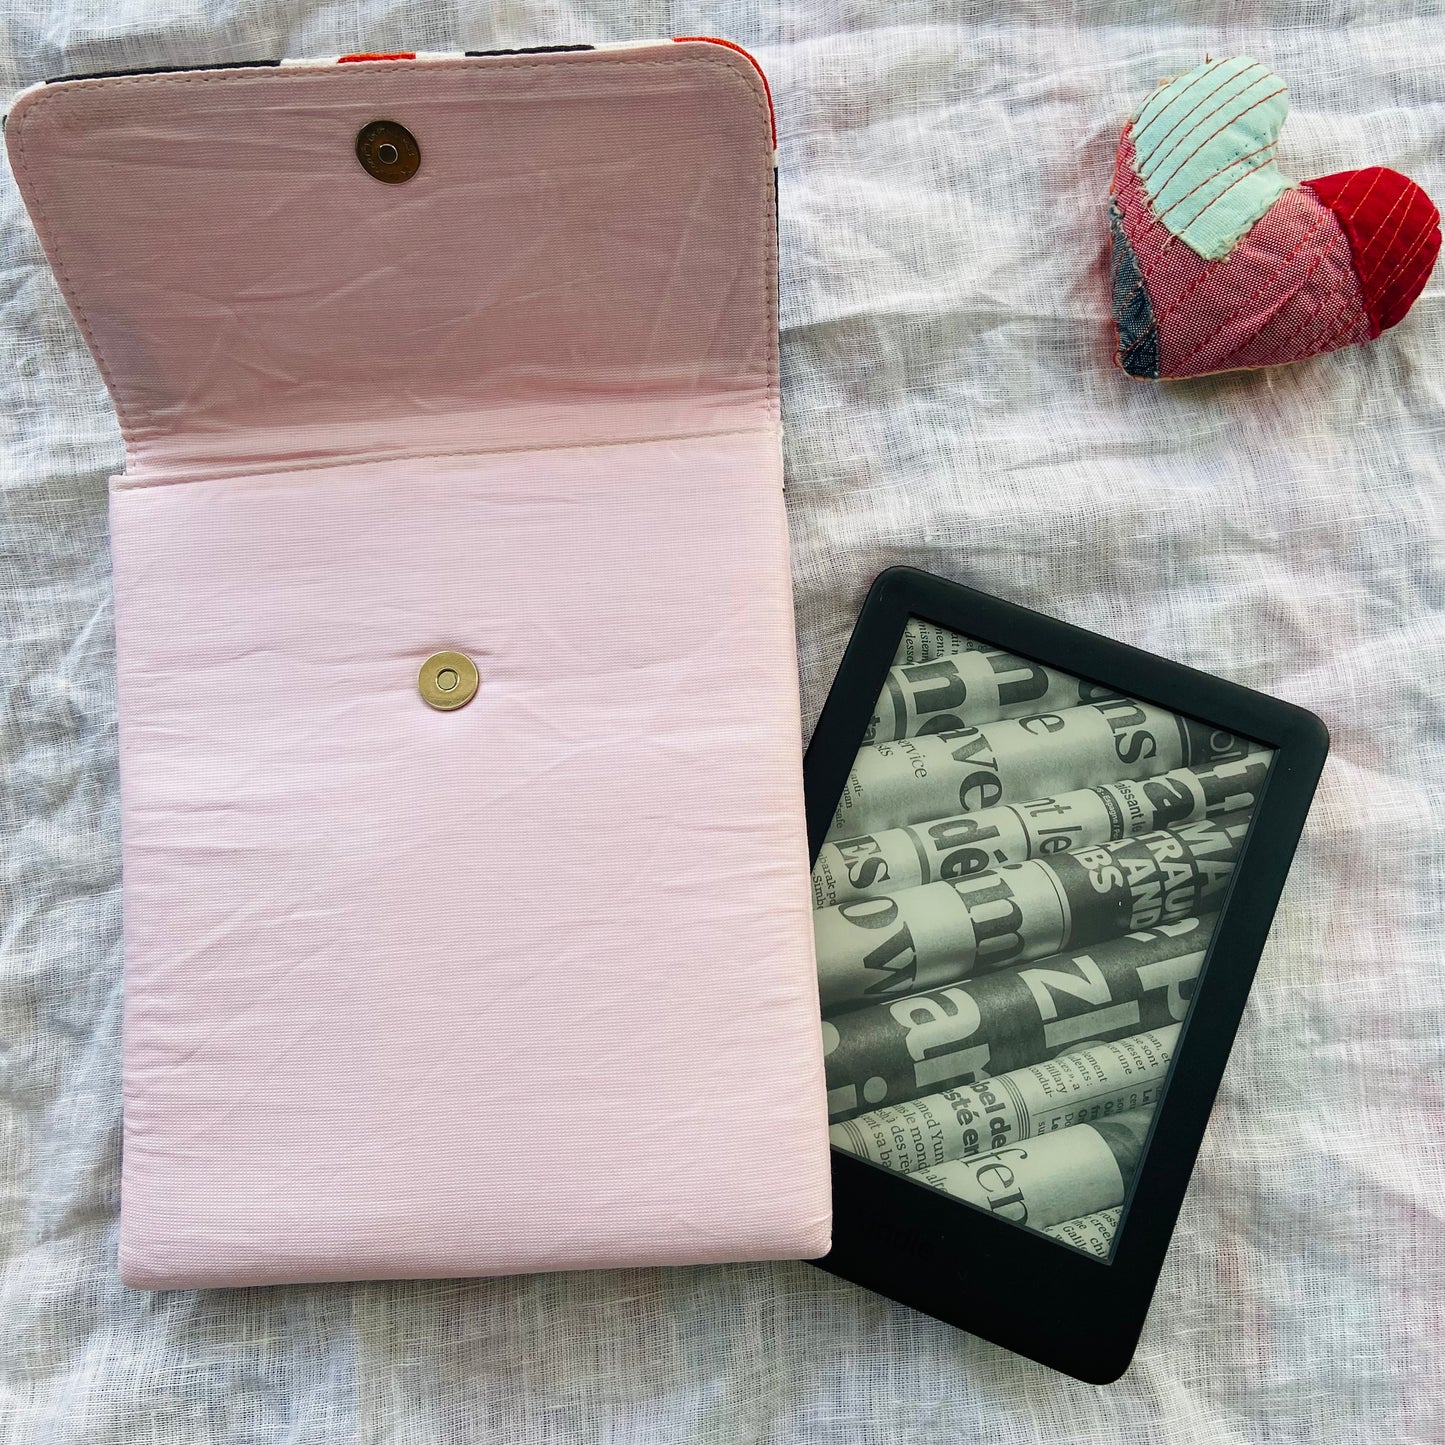 Kindle Cover-Fits all Kindle Paperwhite Gen 1 to 11, Kindle Oasis, Amazon Fire Tab-Pink with Geometric shapes